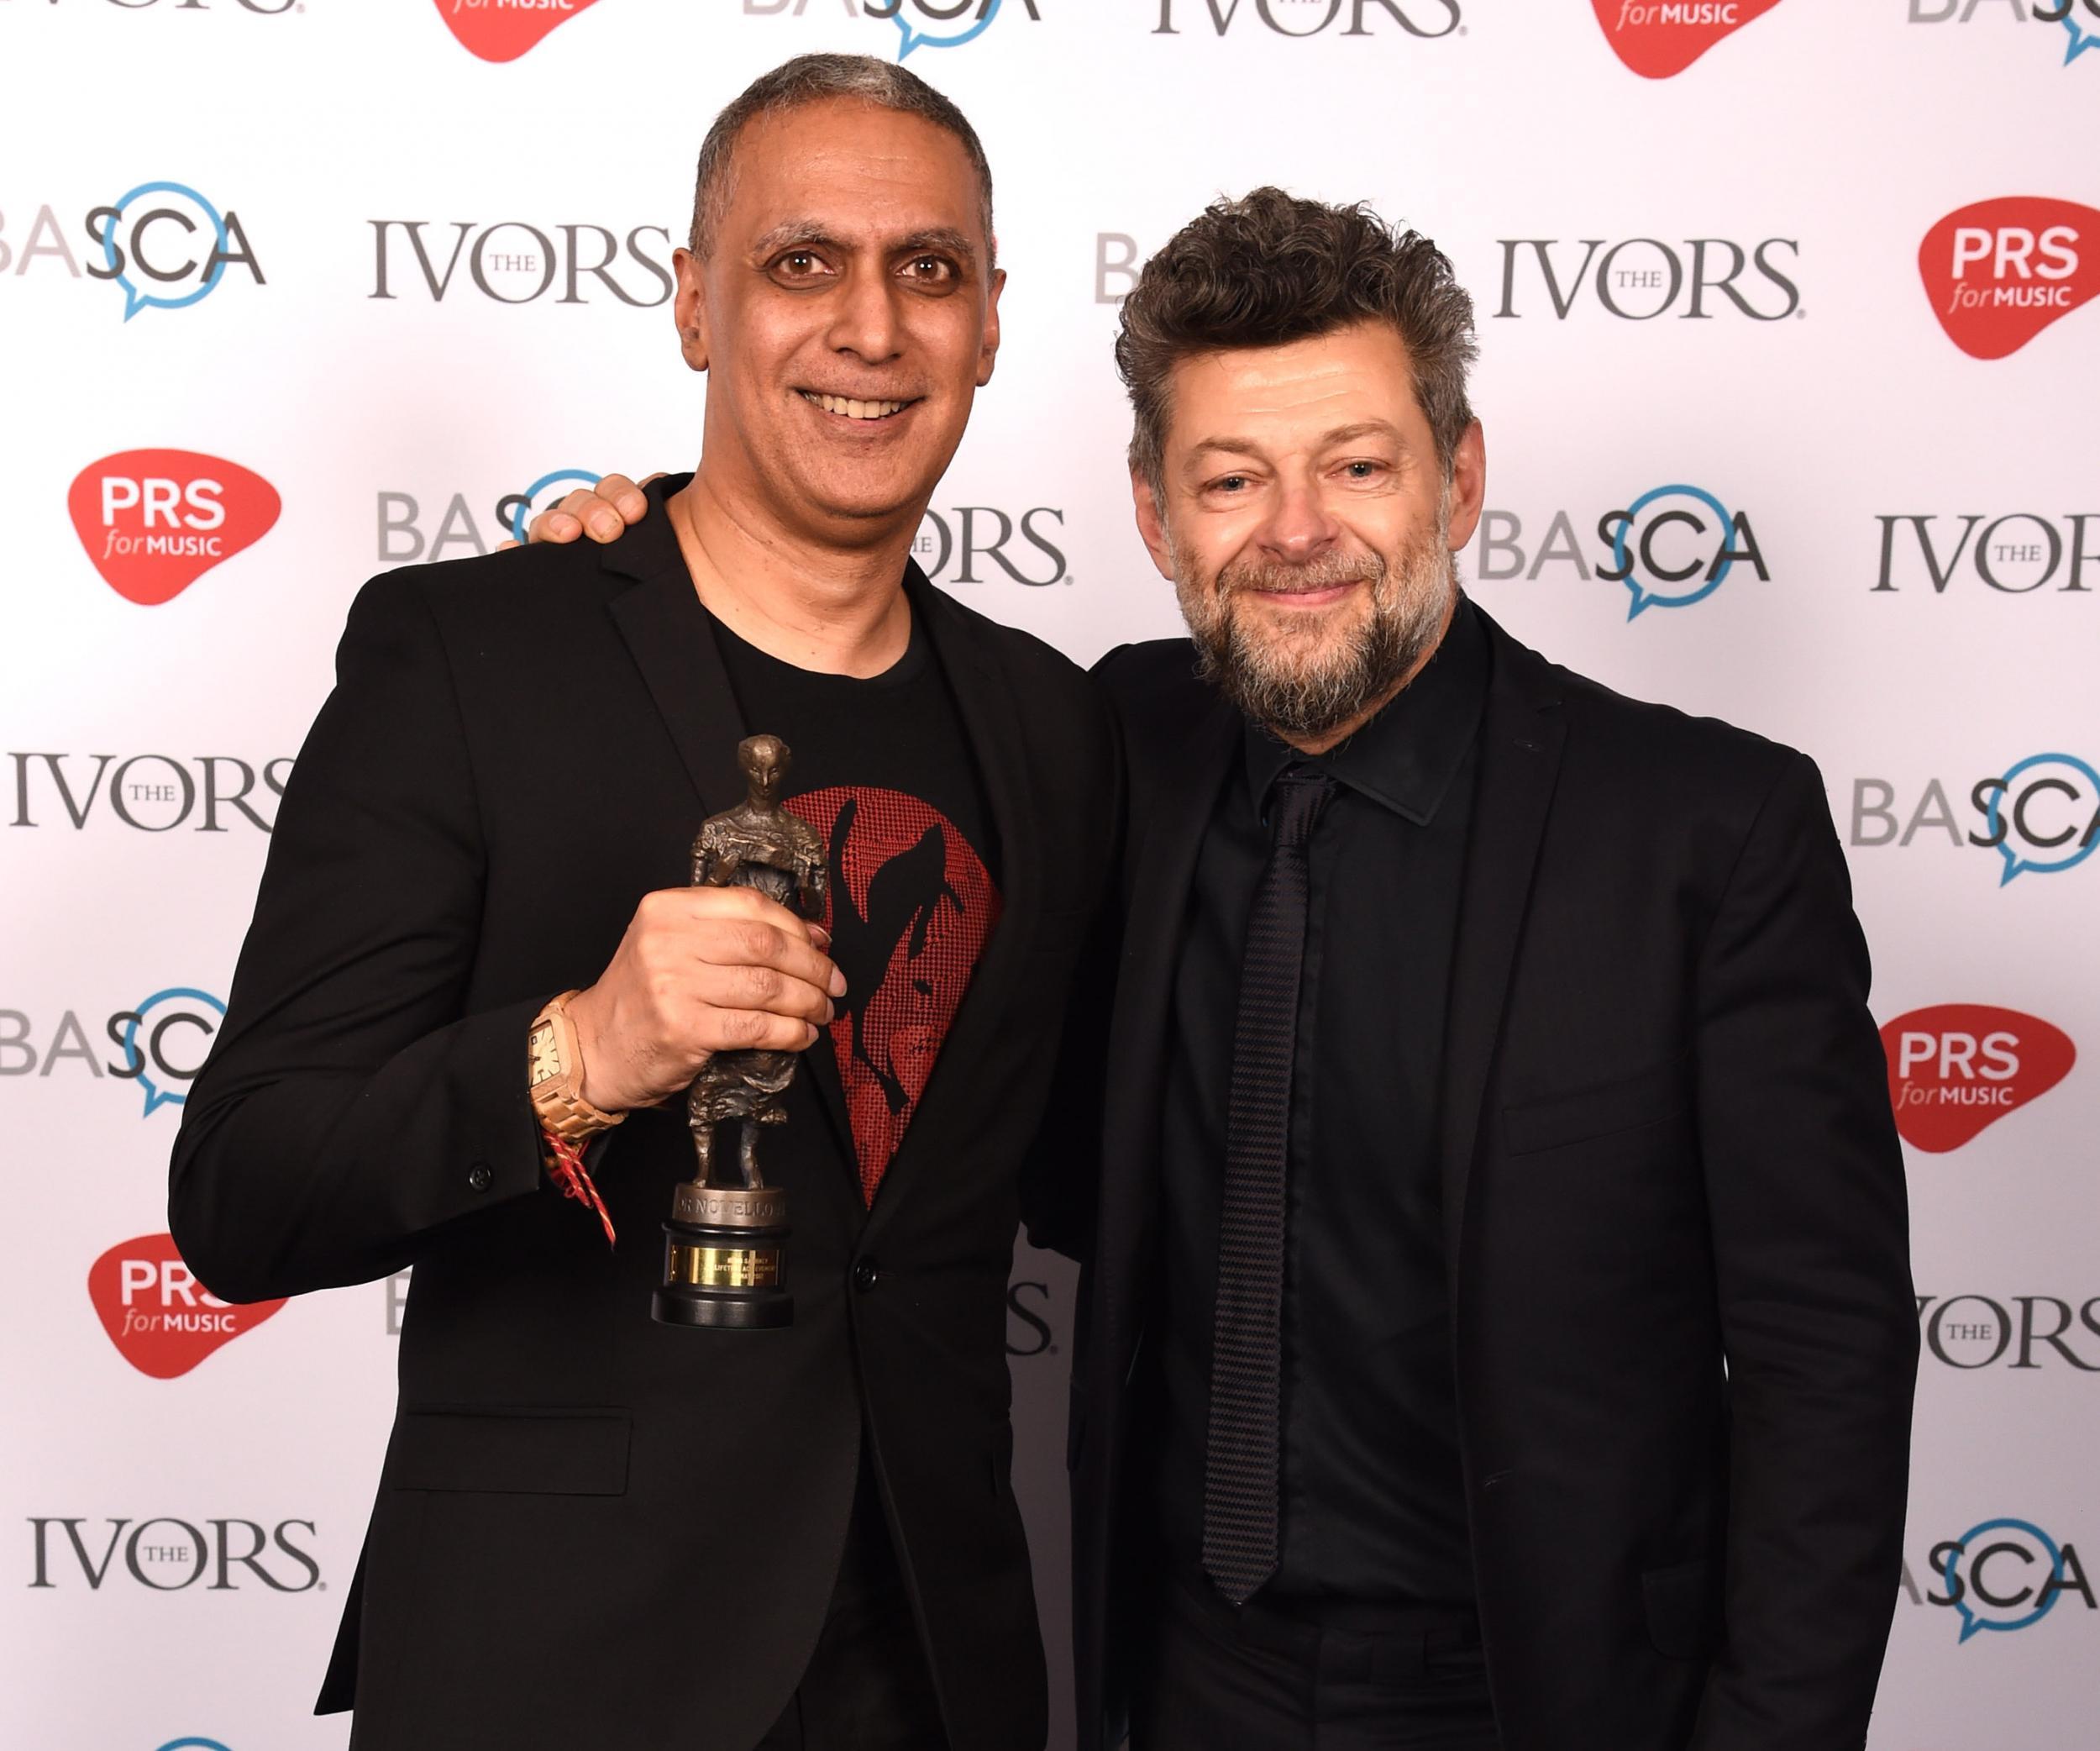 &#13;
Nitin Sawhney with Andy Serkis at the 2017 Ivor Novellos – Serkis presented his friend and collaborator with the Lifetime Achievement Award&#13;